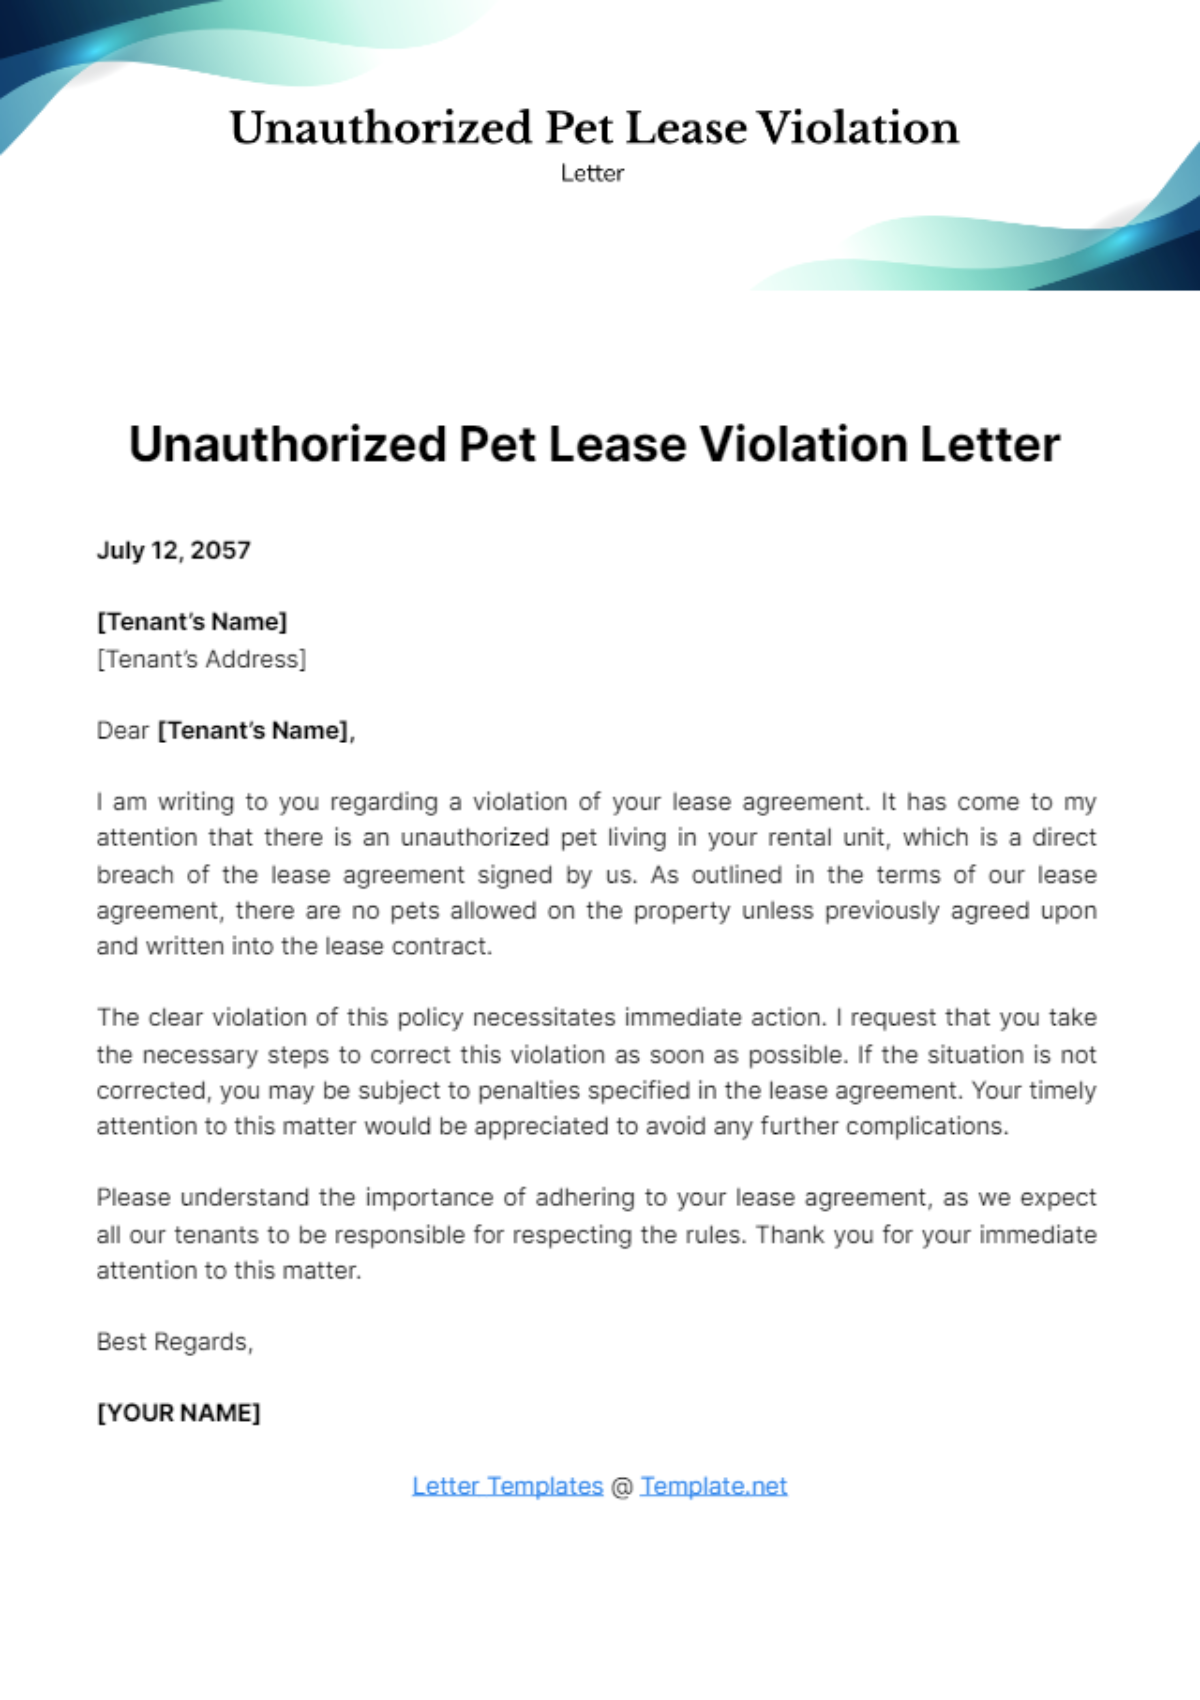 Unauthorized Pet Lease Violation Letter Template